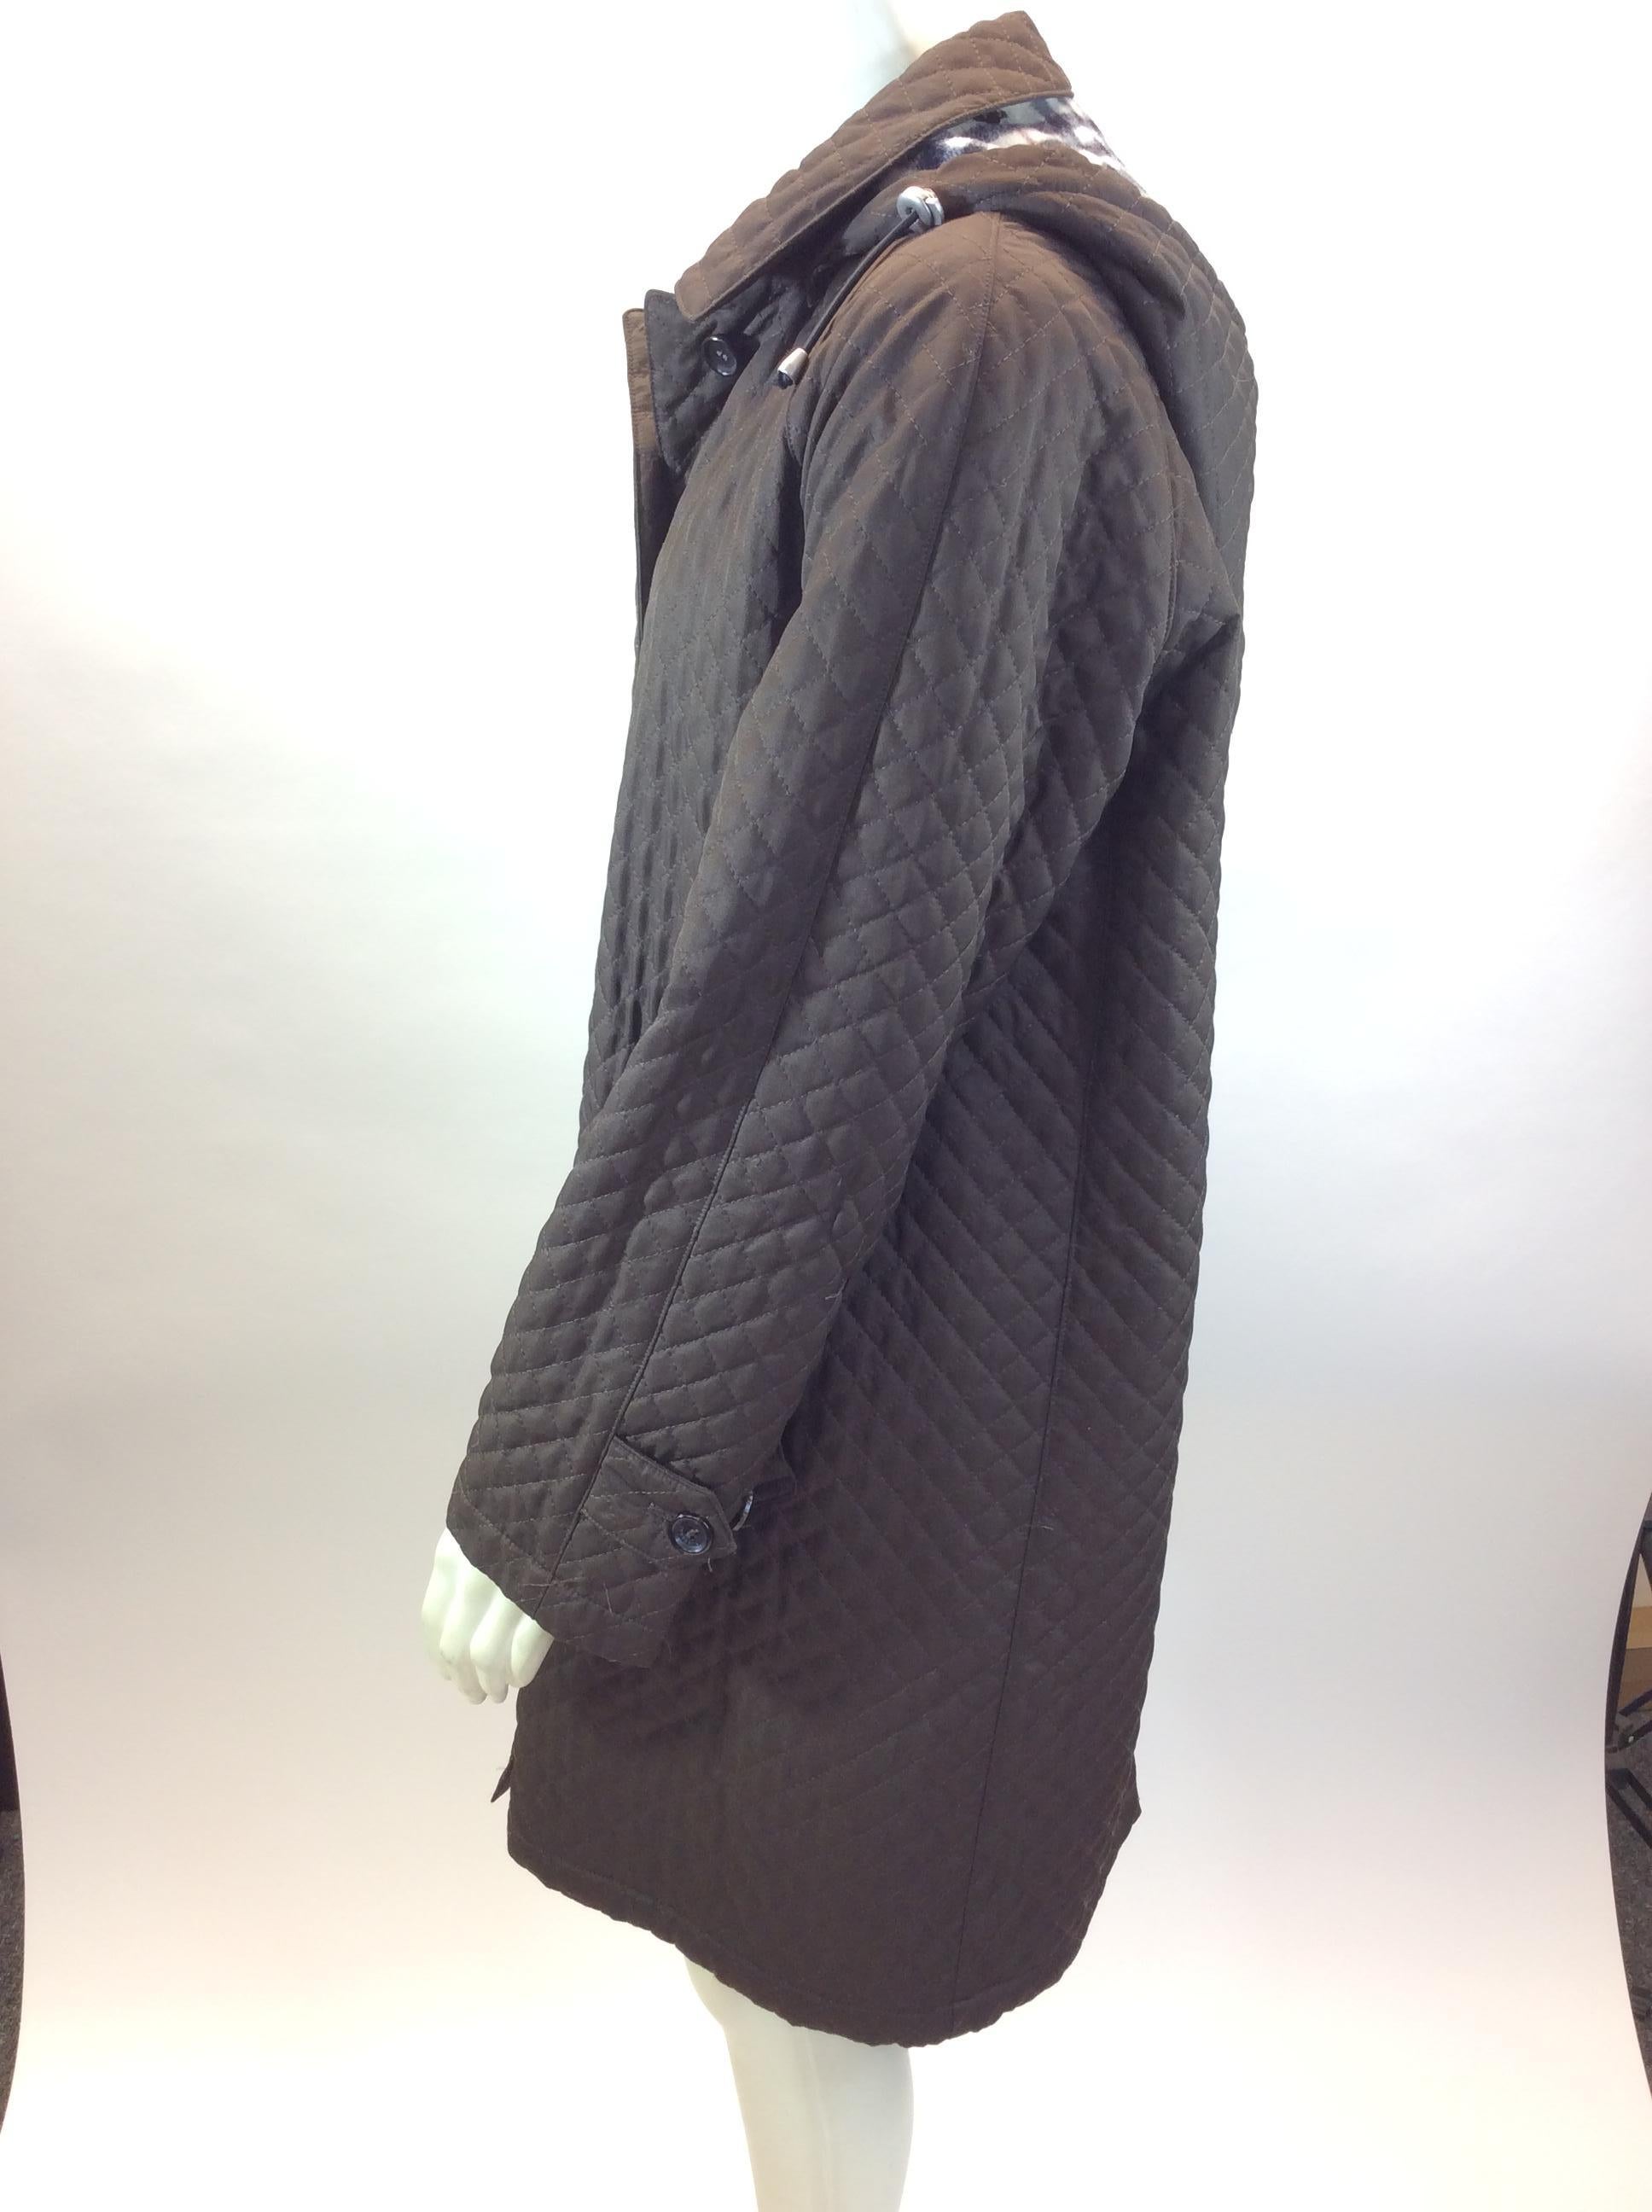 Burberry Brown Quilted Coat
$299
Made in the US
100% Polyester
Size 8
Length 34